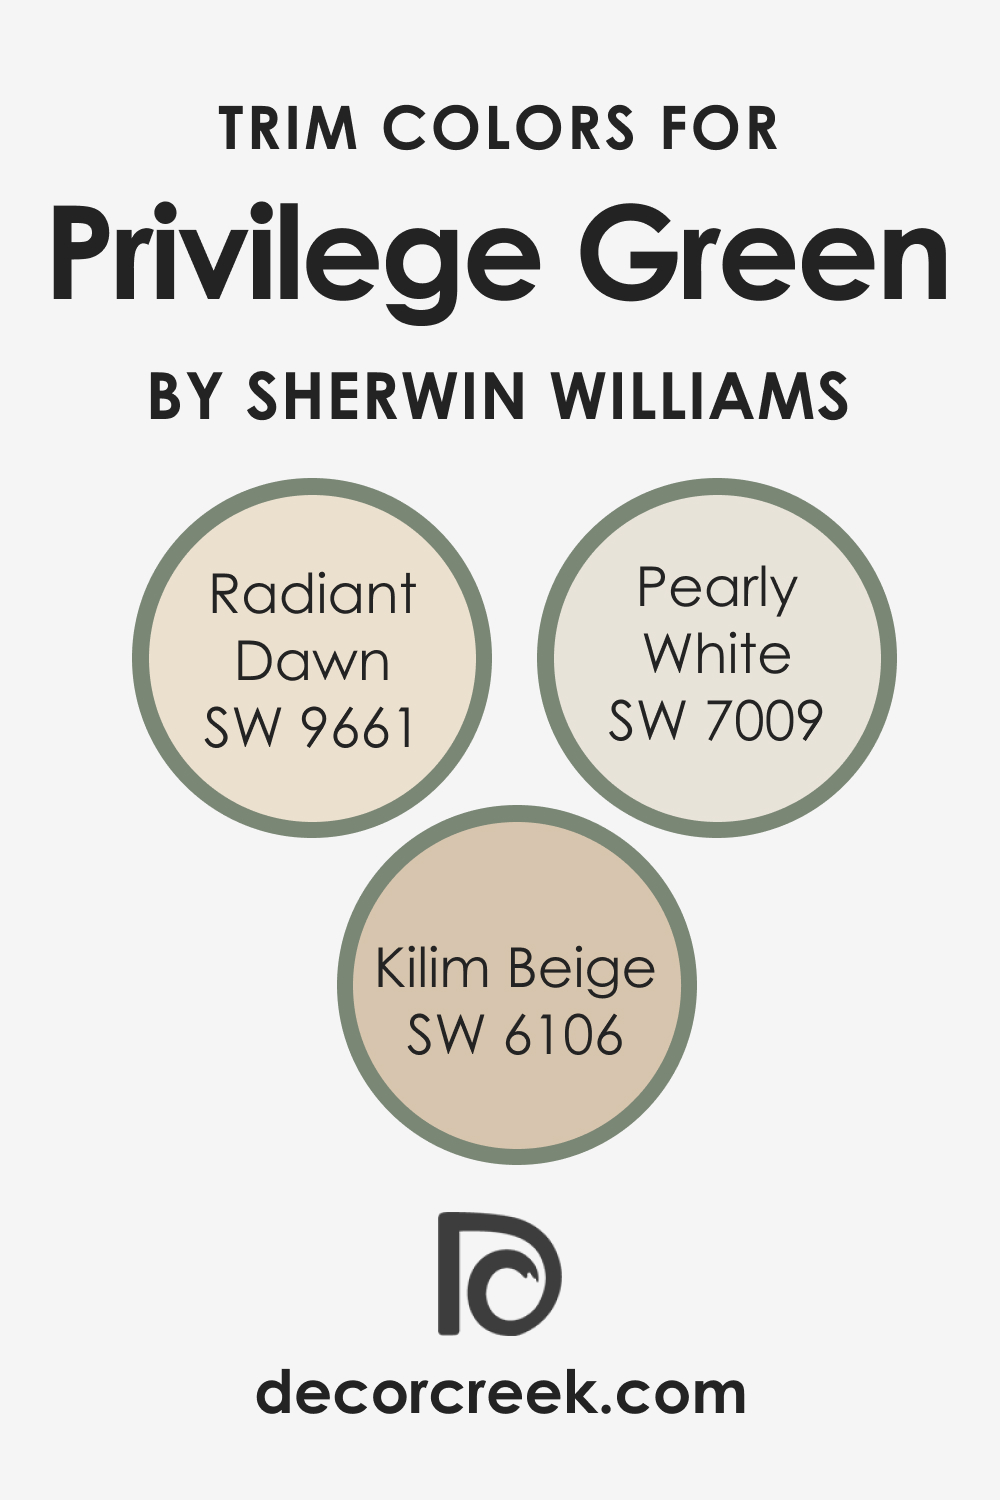 What Is the Best Trim Color For Privilege Green SW 6193?